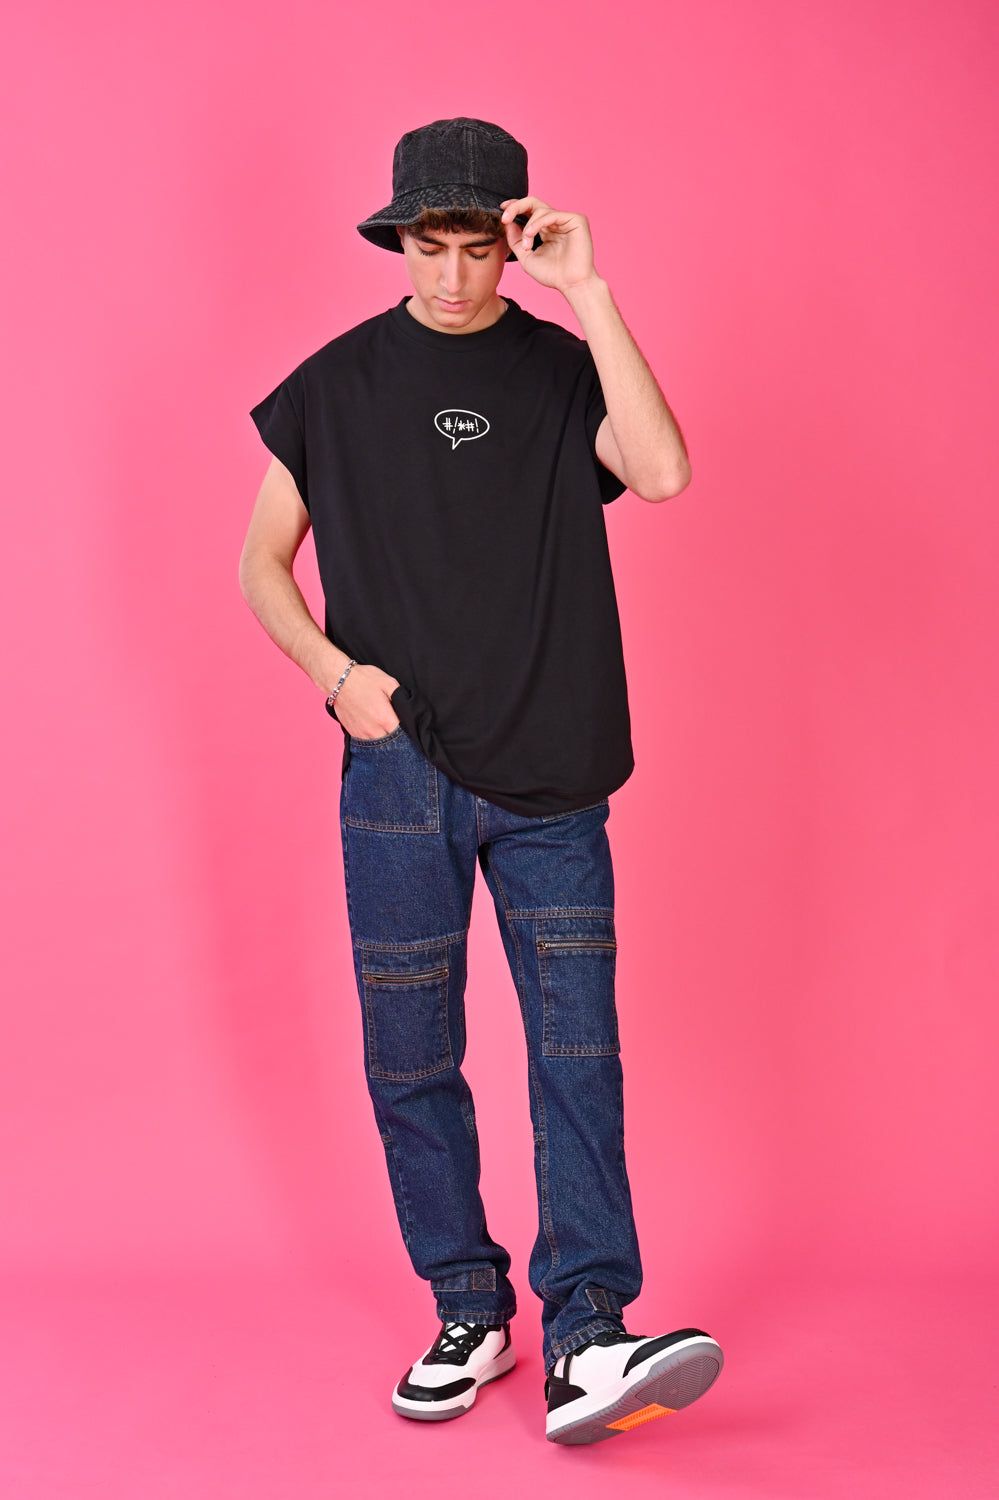 RELAXED FIT GRAPHIC TEE